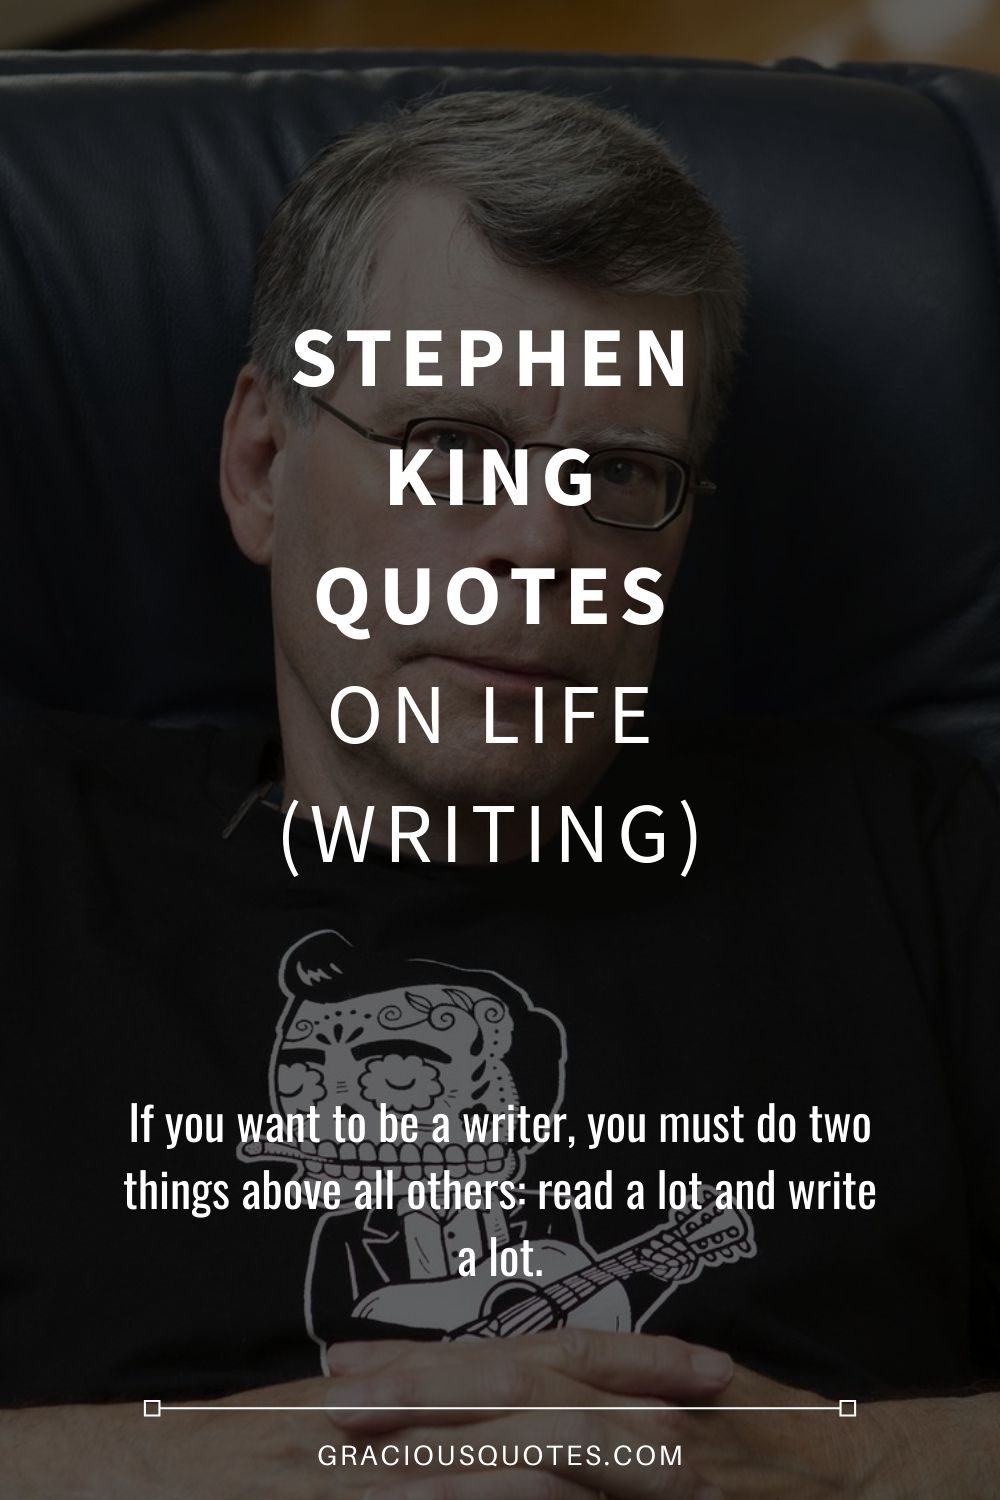 Stephen King Quotes on Life (WRITING) - Gracious Quotes